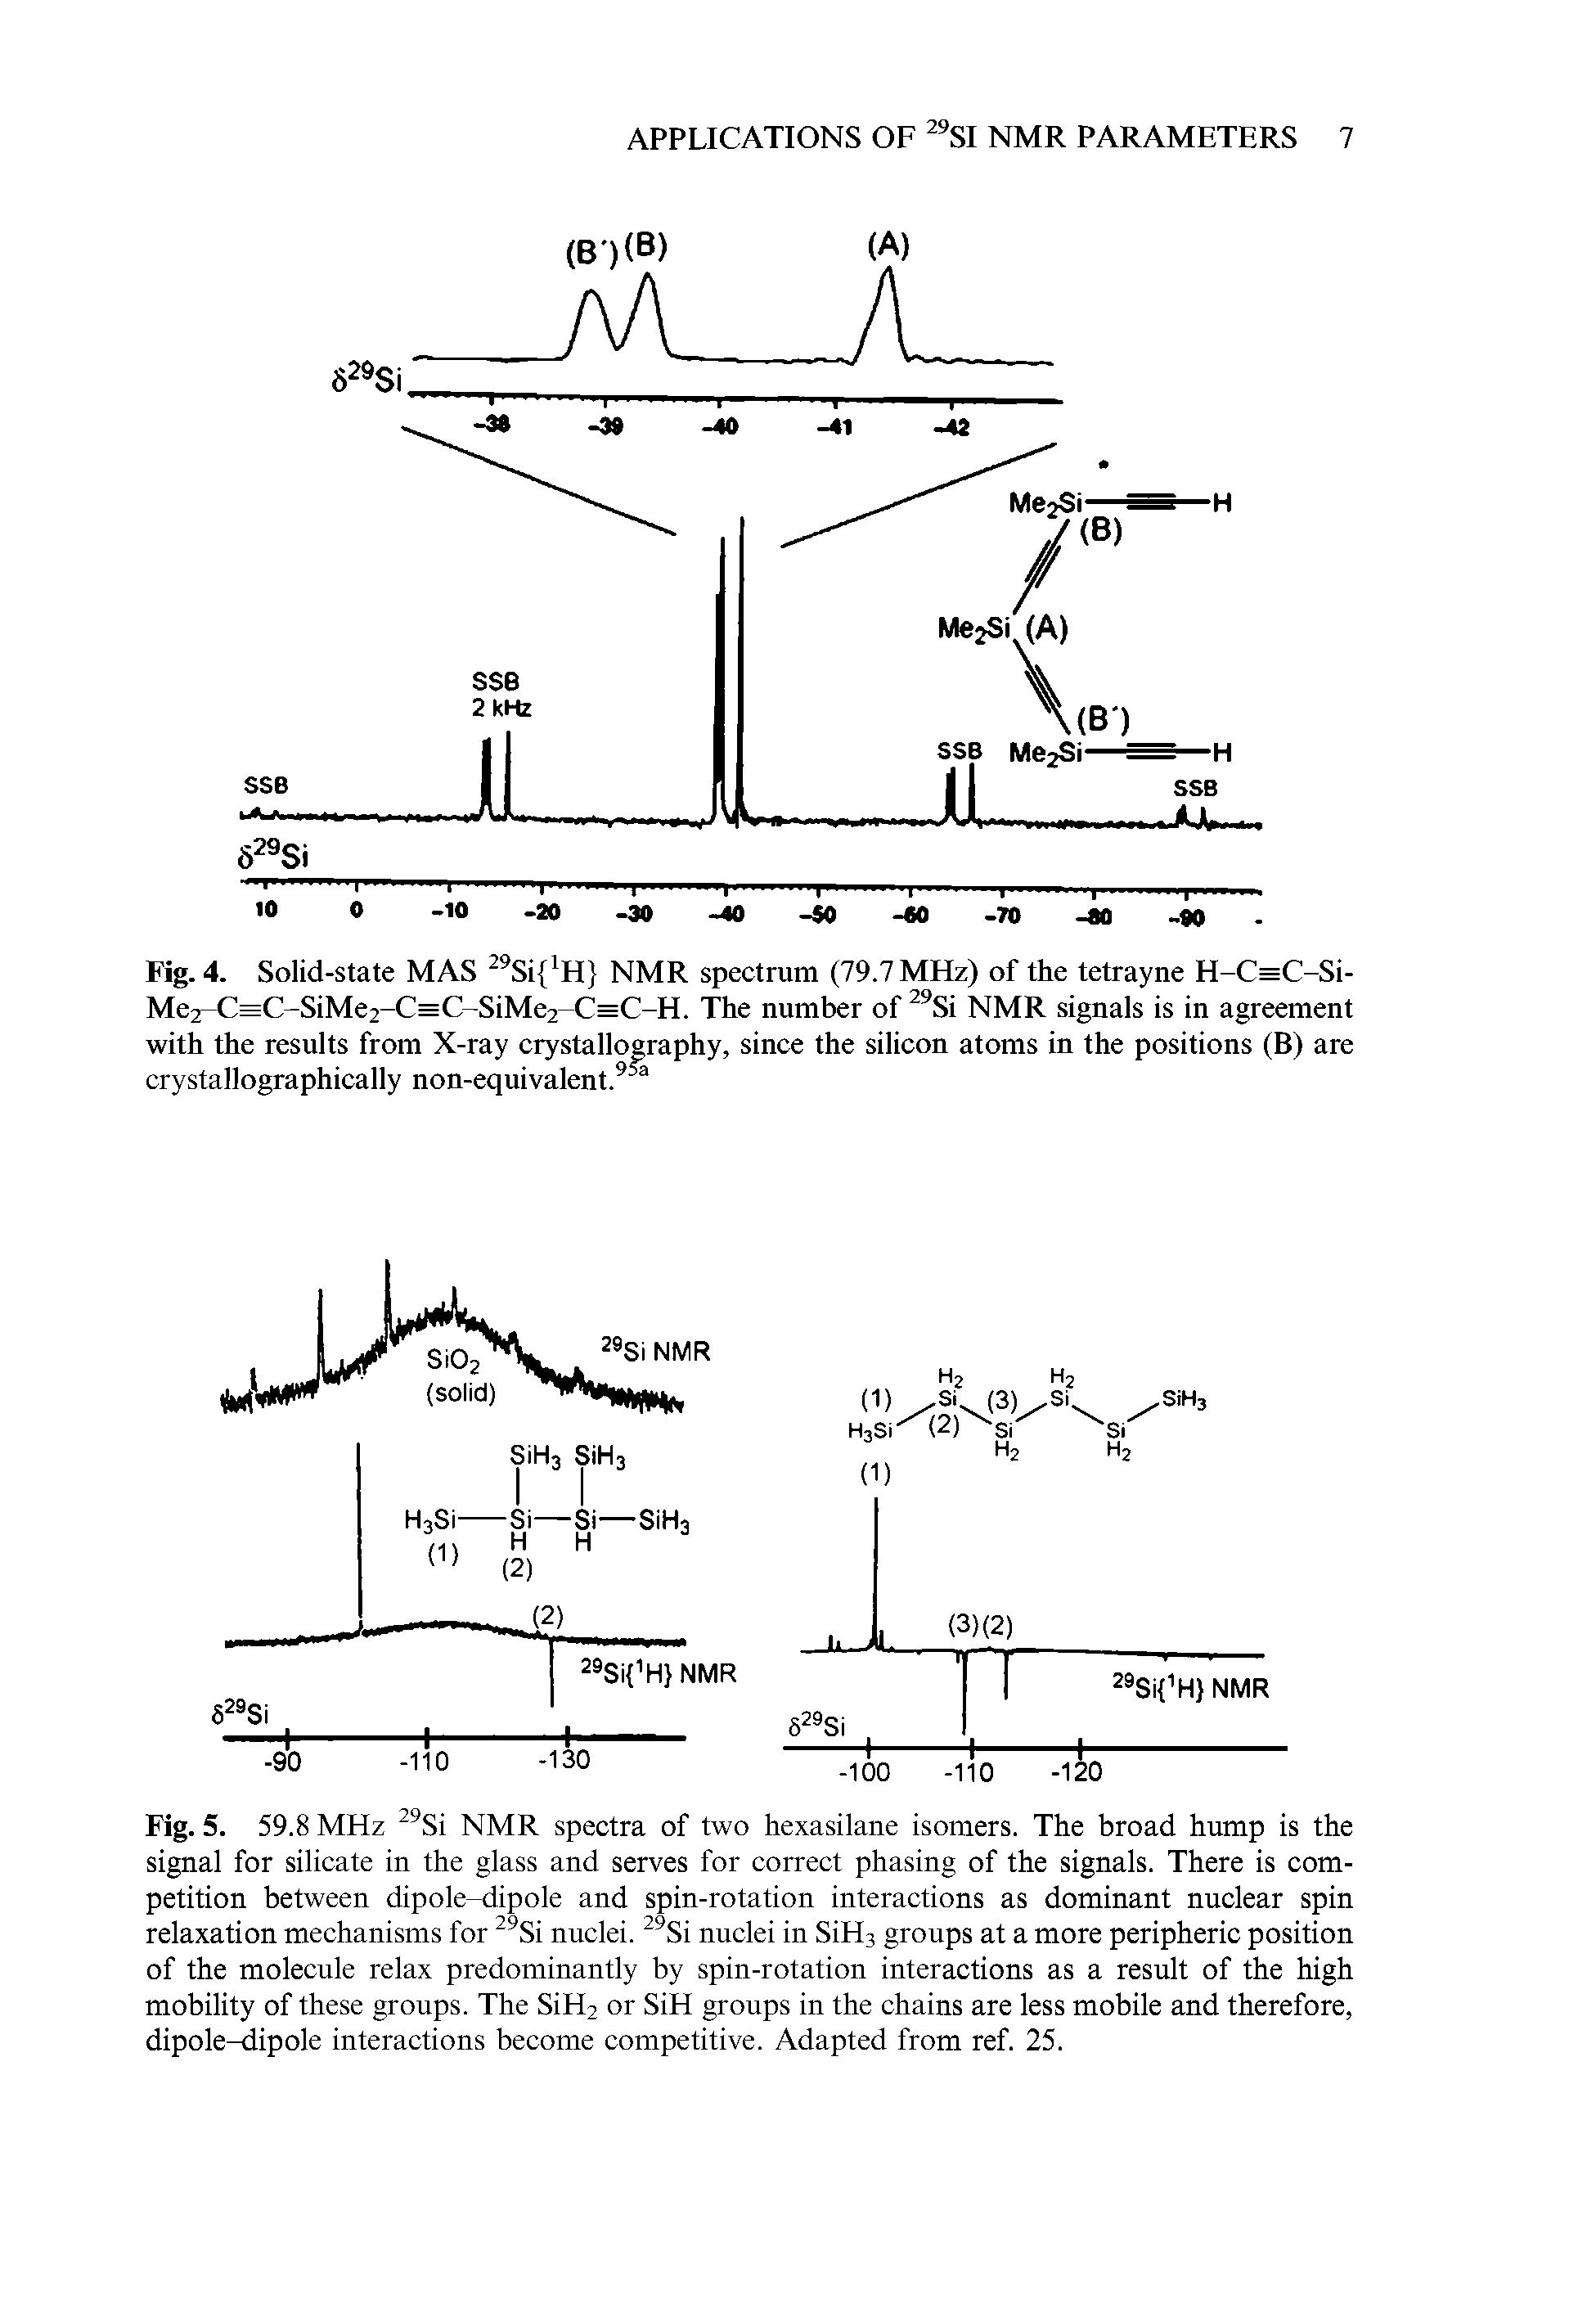 Fig. 5. 59.8 MHz Si NMR spectra of two hexasilane isomers. The broad hump is the signal for silicate in the glass and serves for correct phasing of the signals. There is competition between dipole-dipole and spin-rotation interactions as dominant nuclear spin relaxation mechanisms for Si nuclei. Si nuclei in SiHs groups at a more peripheric position of the molecule relax predominantly by spin-rotation interactions as a result of the high mobility of these groups. The SiH2 or SiH groups in the chains are less mobile and therefore, dipole-dipole interactions become competitive. Adapted from ref. 25.